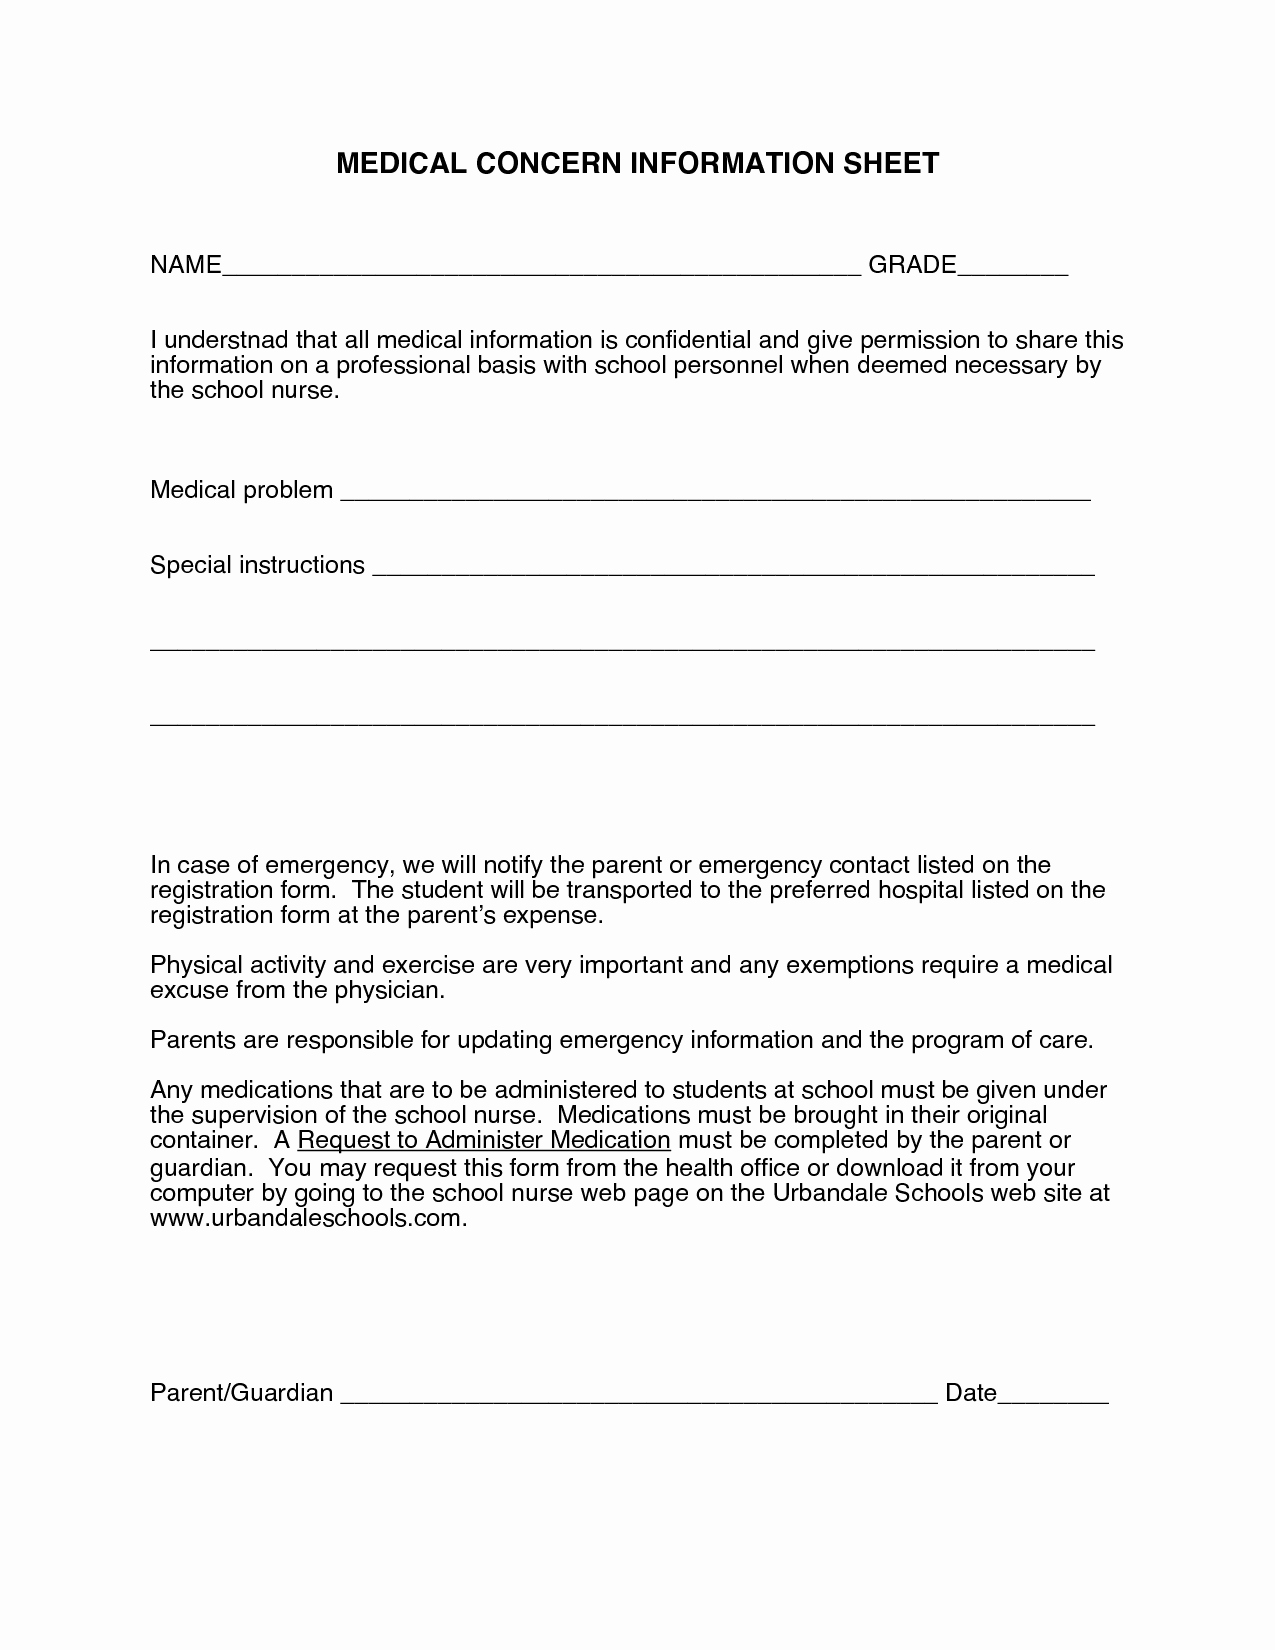 Fake Doctors Note Template Inspirational Fake Doctors Note Template for Work or School Pdf